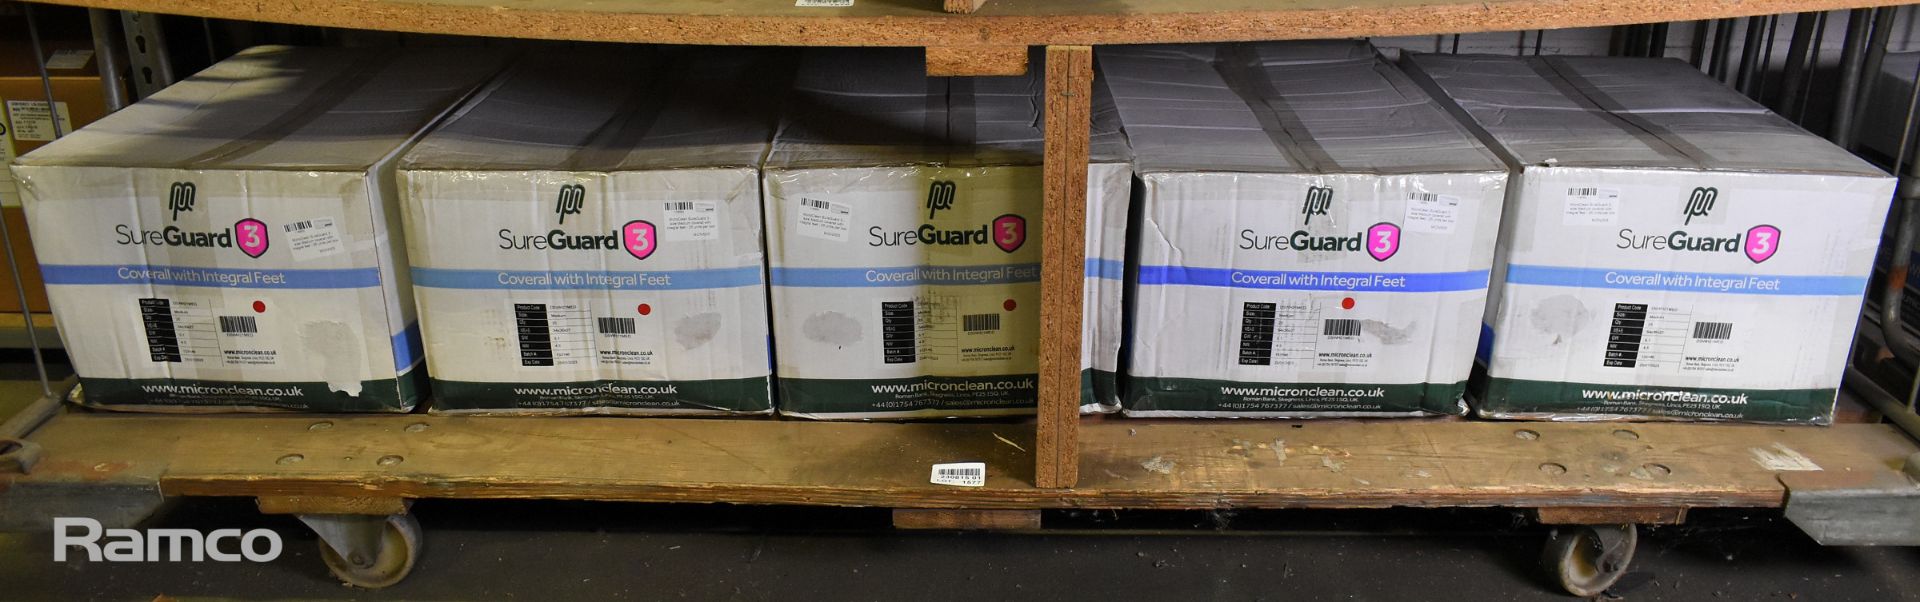 5x boxes of MicroClean SureGuard 3 - size small coverall with integral feet - 25 units per box